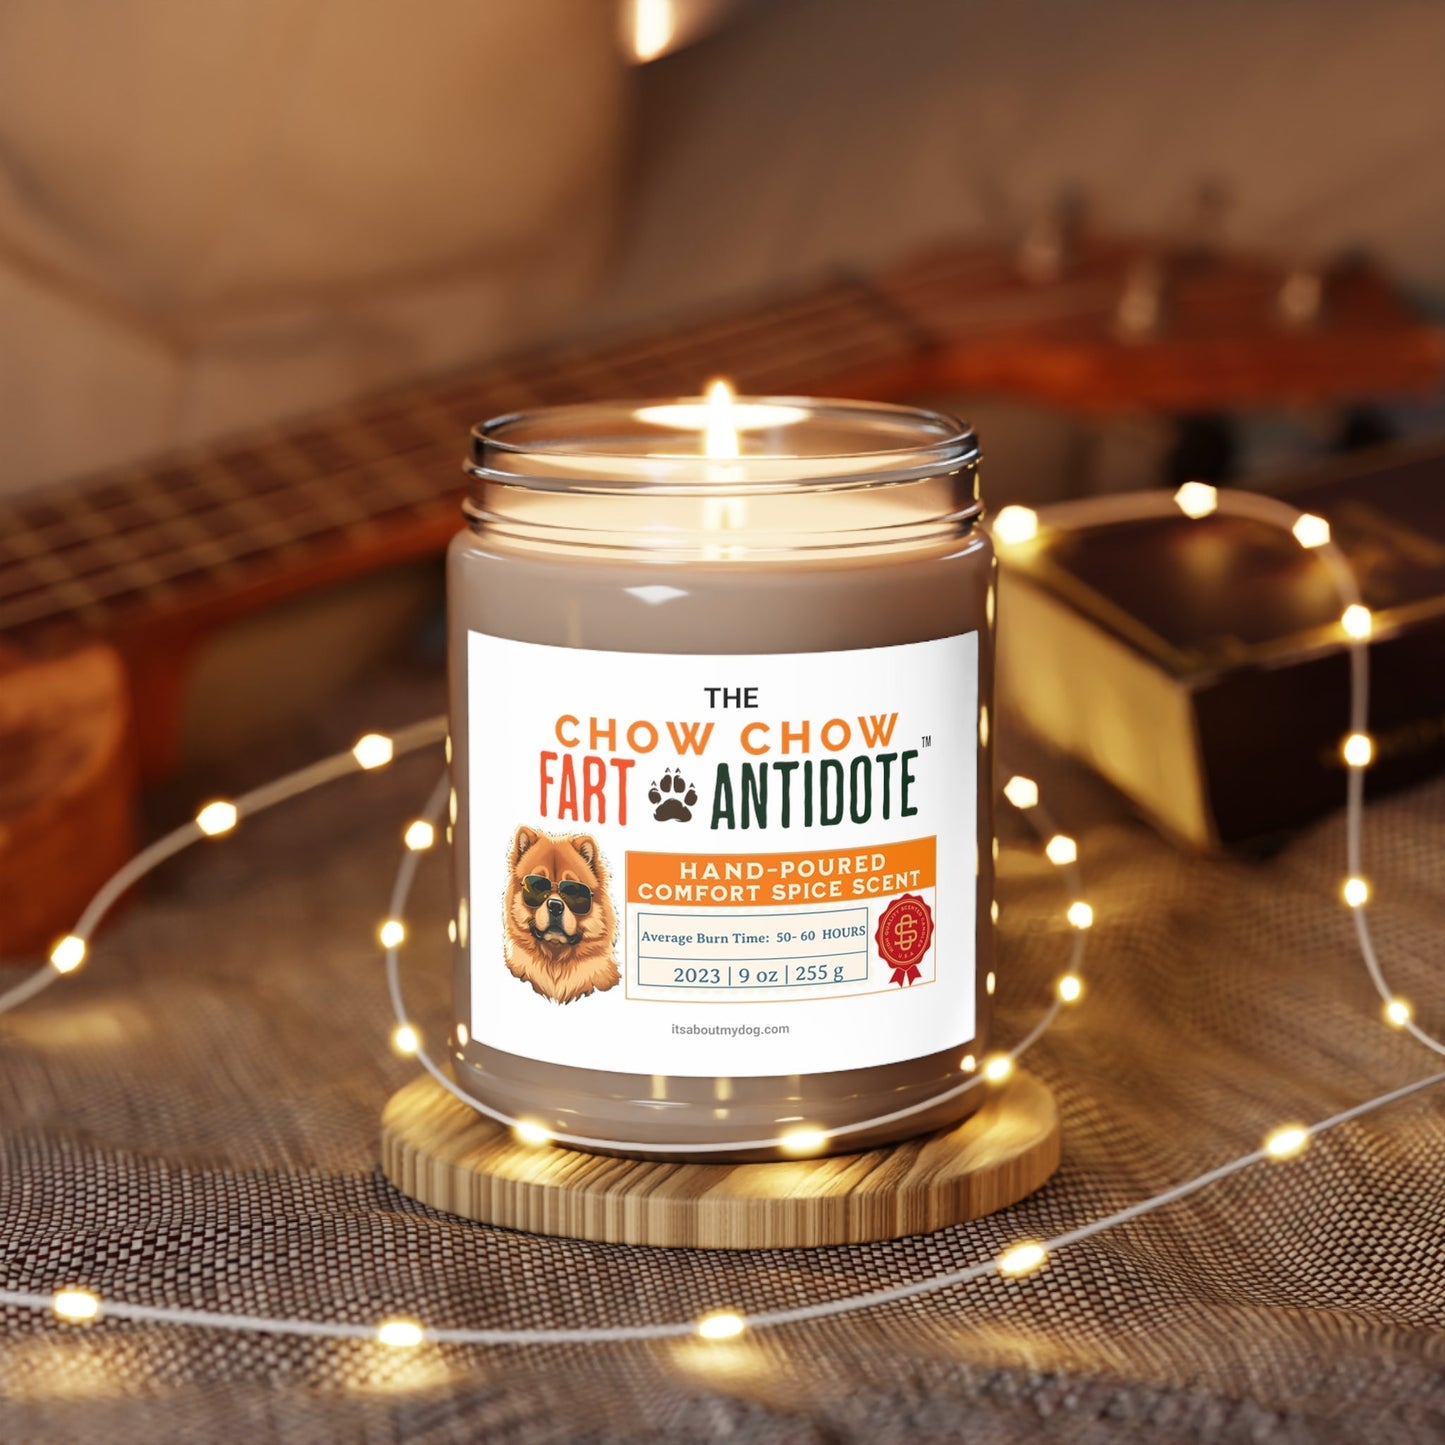 Chow Chow Dog Fart Antidote-9oz Scented Candle, Chow Chow Gifts27.99-(FREE Delivery) Shop now at itsaboutmydog.com, chow chow for sale, chow chow gifts, dog fart candle, light me when the dog farts candle, sorry my dog farted candle